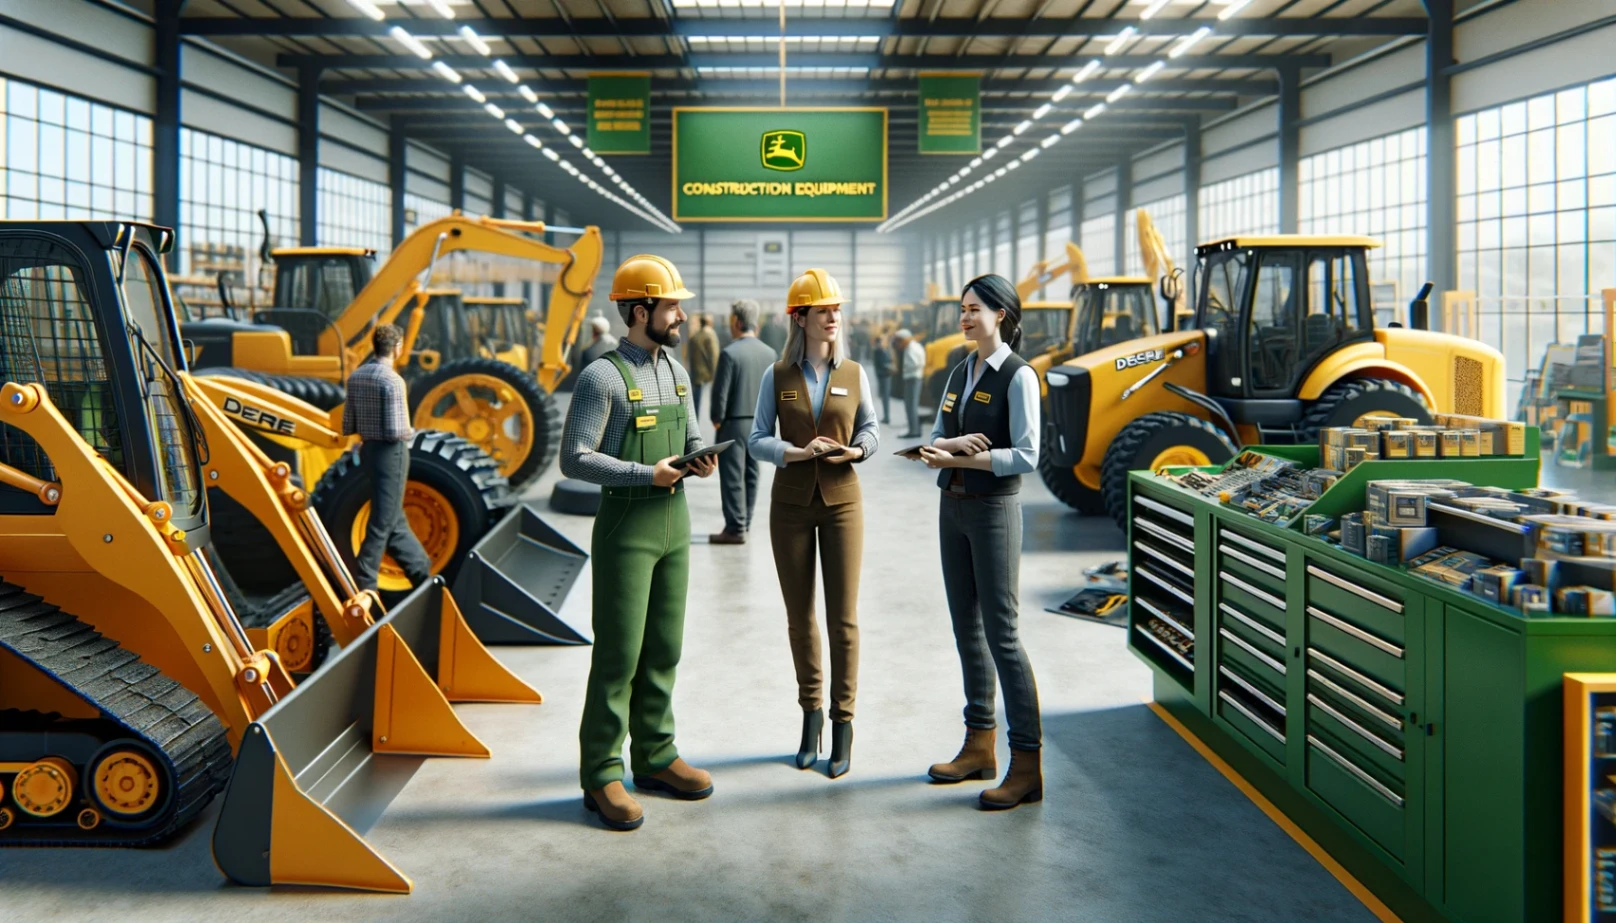 Deere Construction Jobs: Discover How to Apply for Positions Now